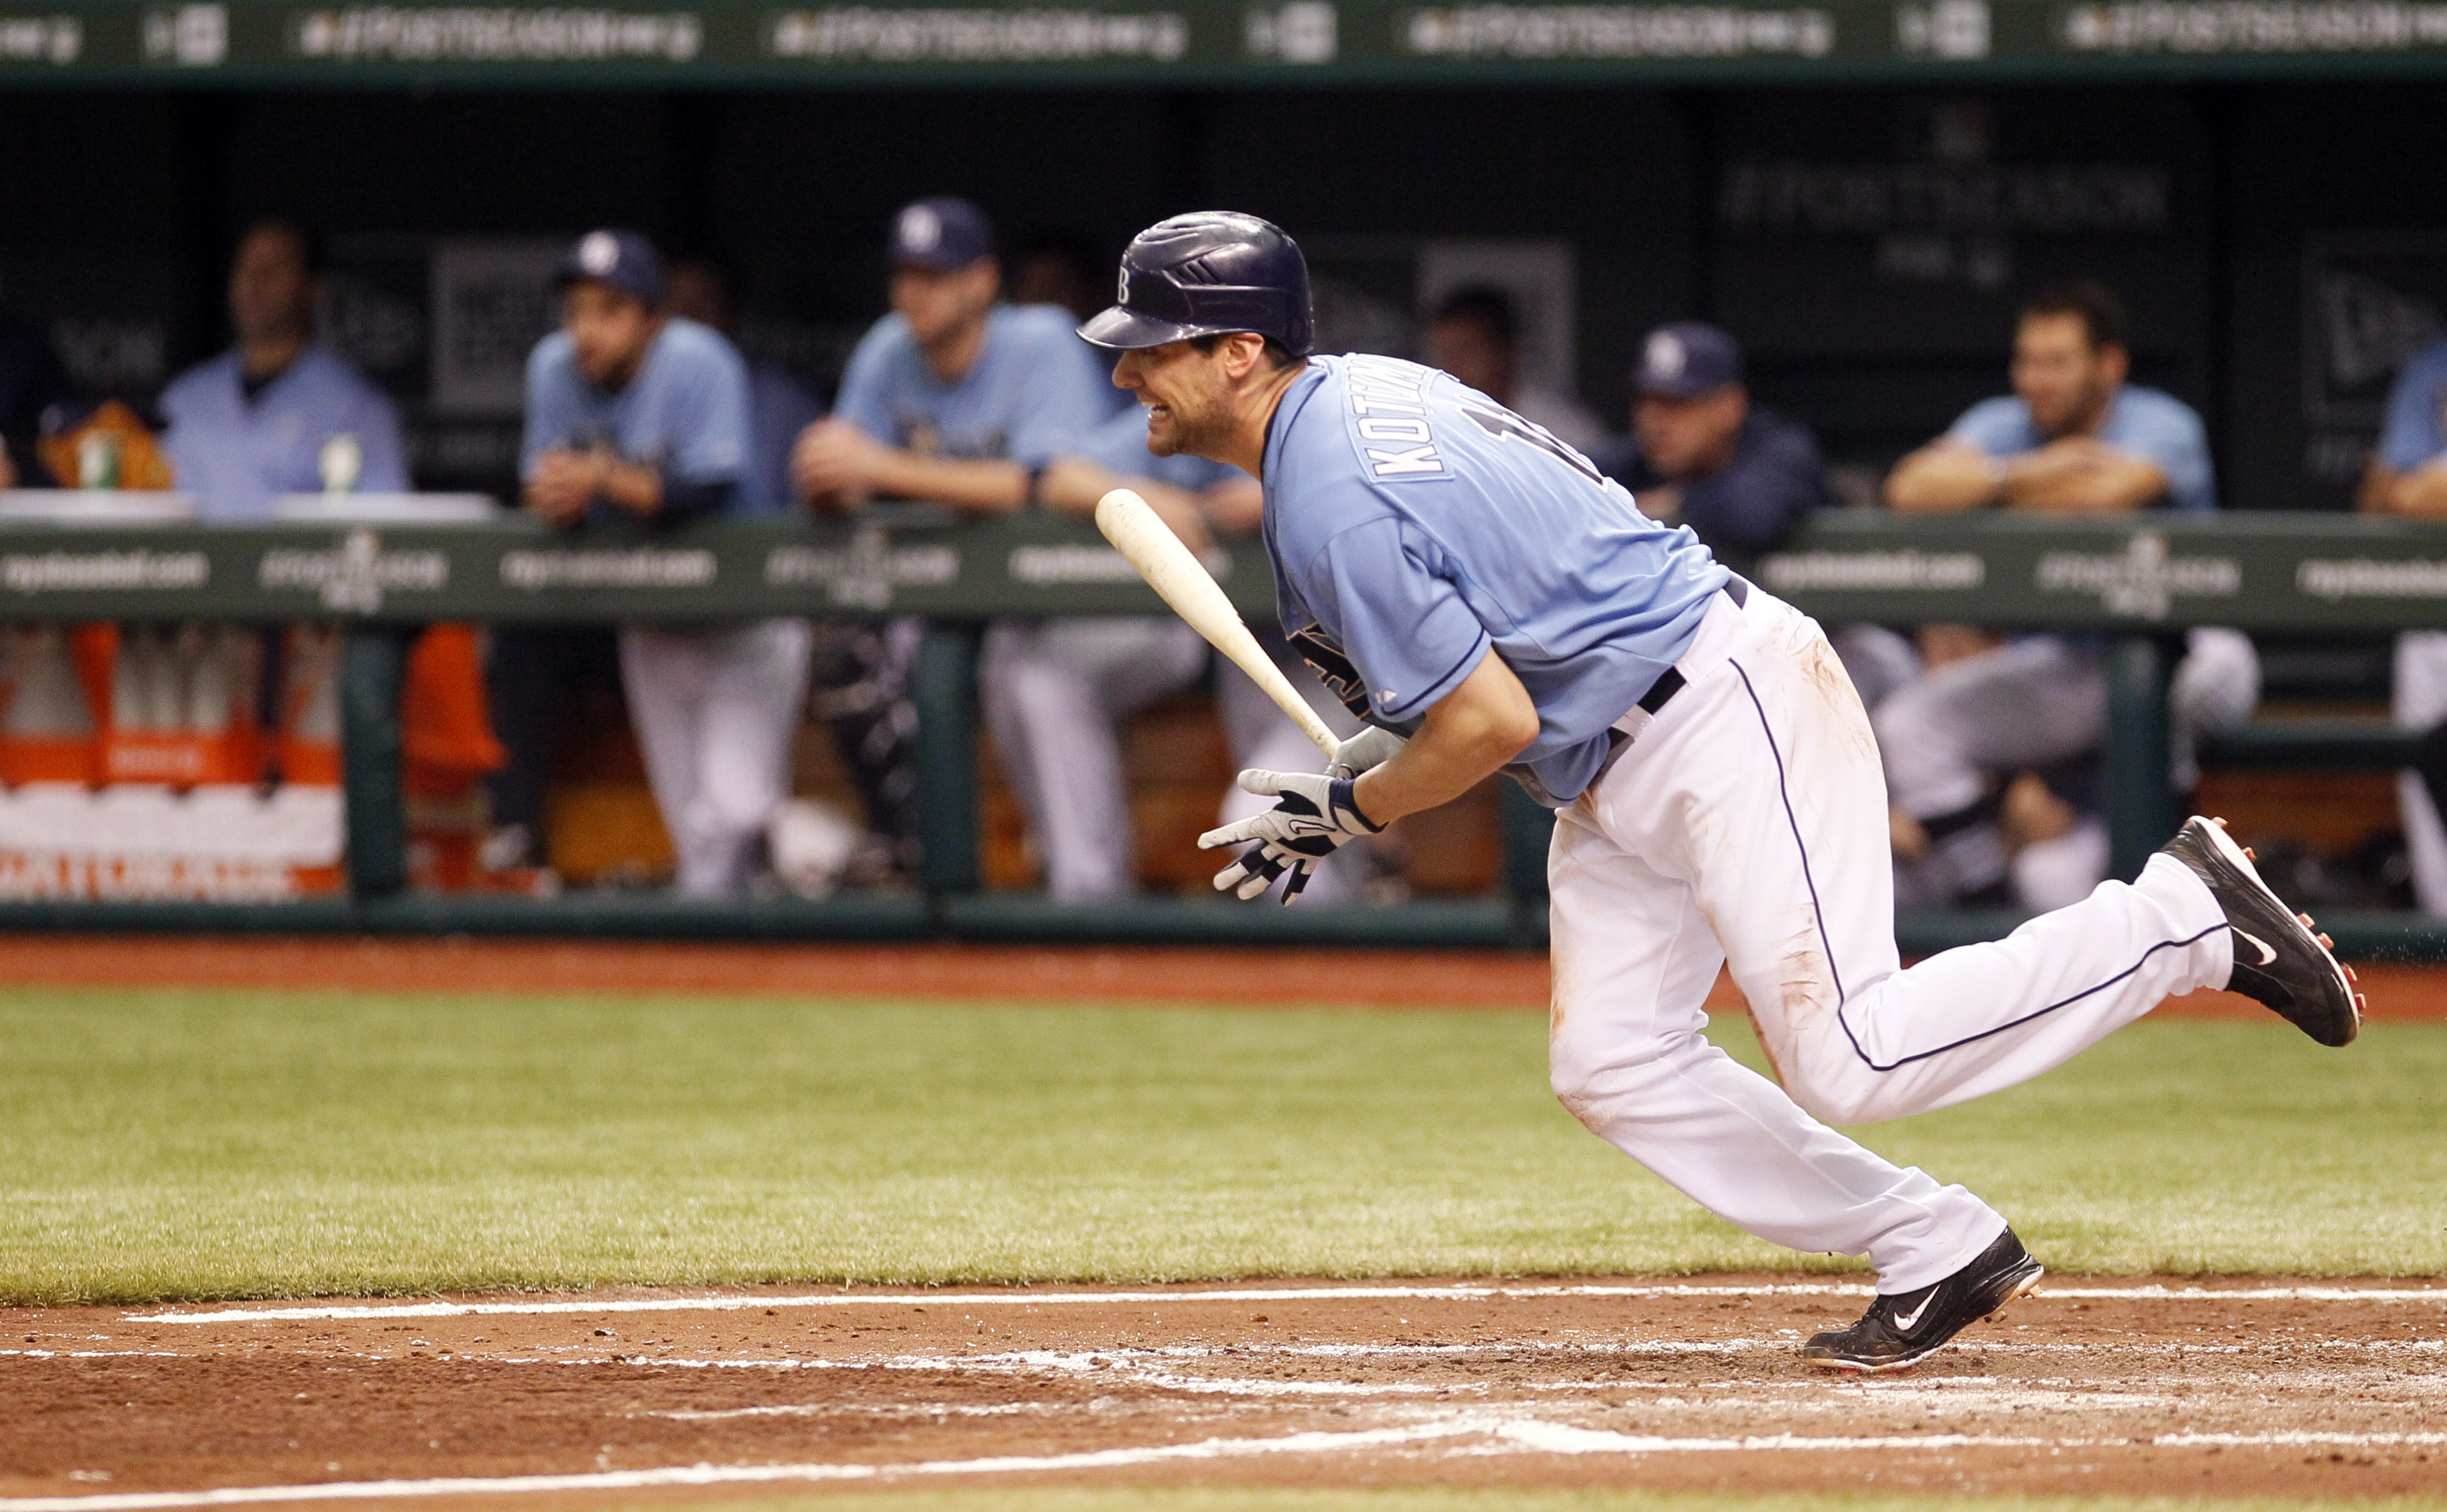 Tampa Bay Rays: Revisiting the trade that sent Evan Longoria to